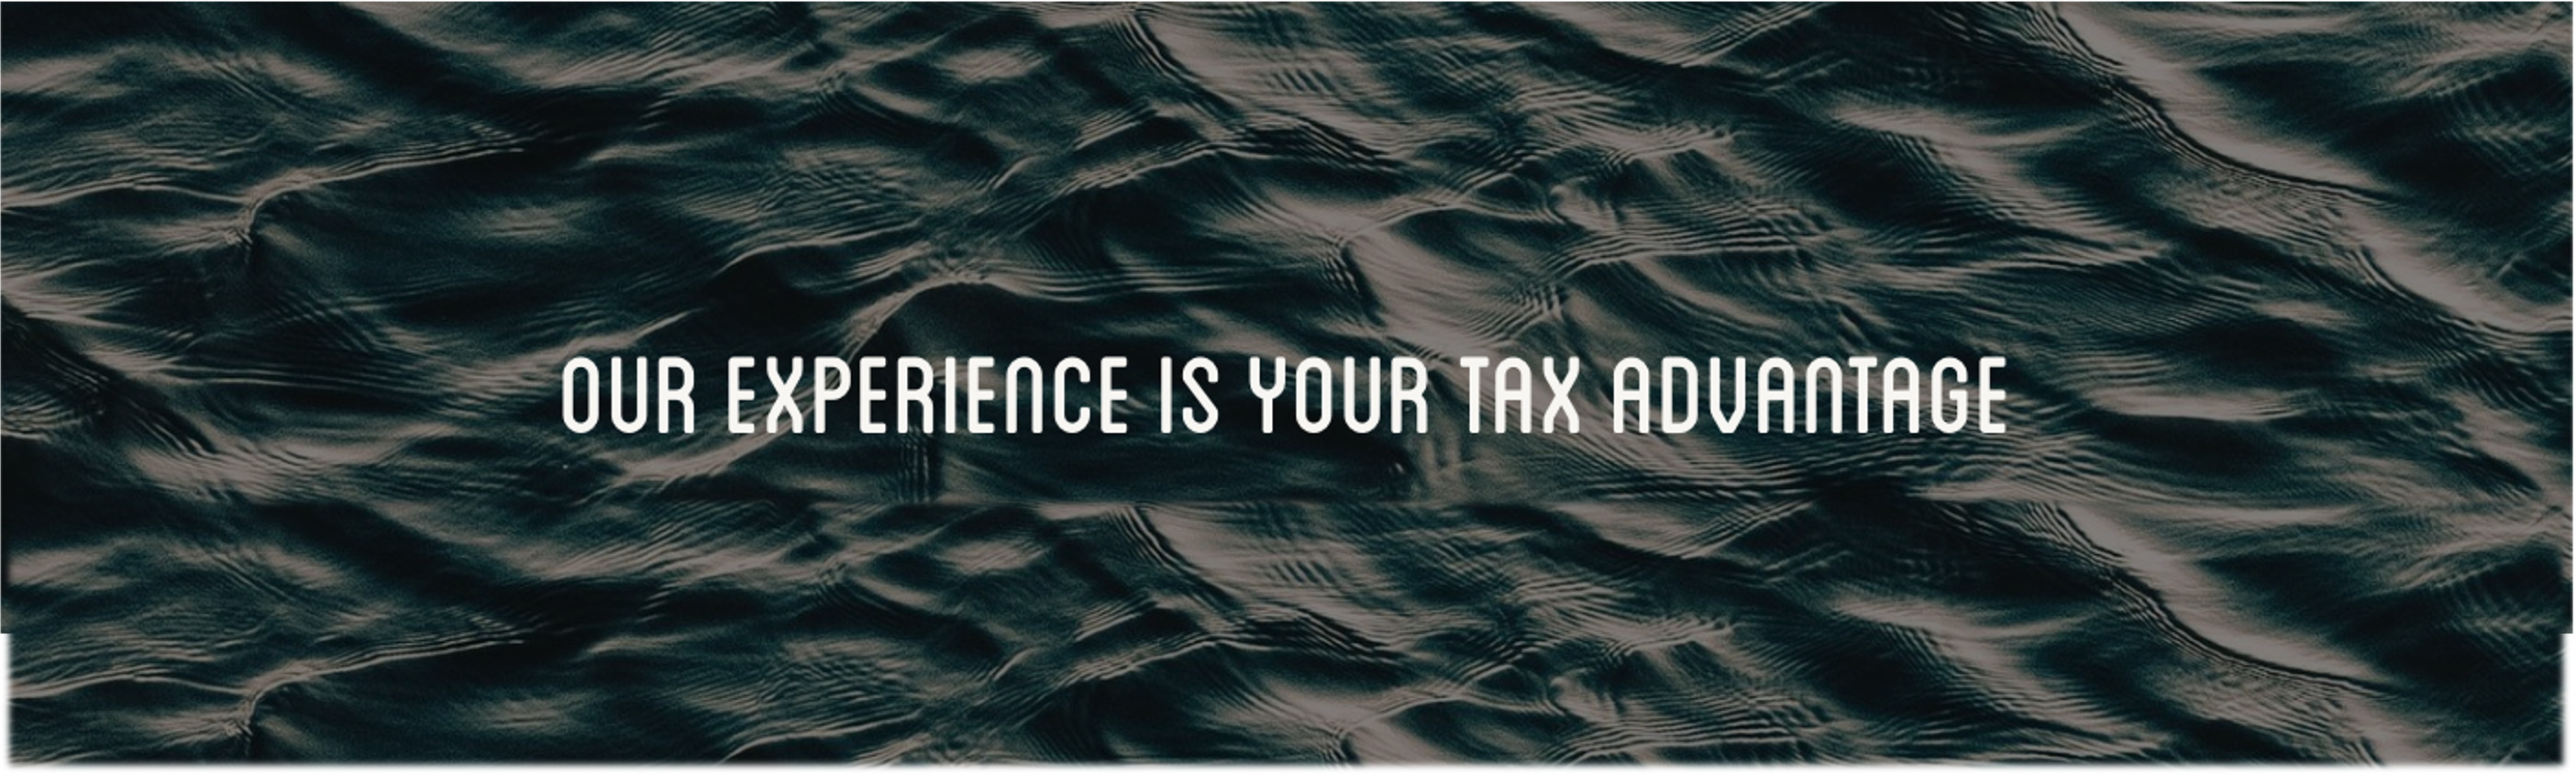 "Our experience is your tax advantage" vStore banner image Bordeleau CPA